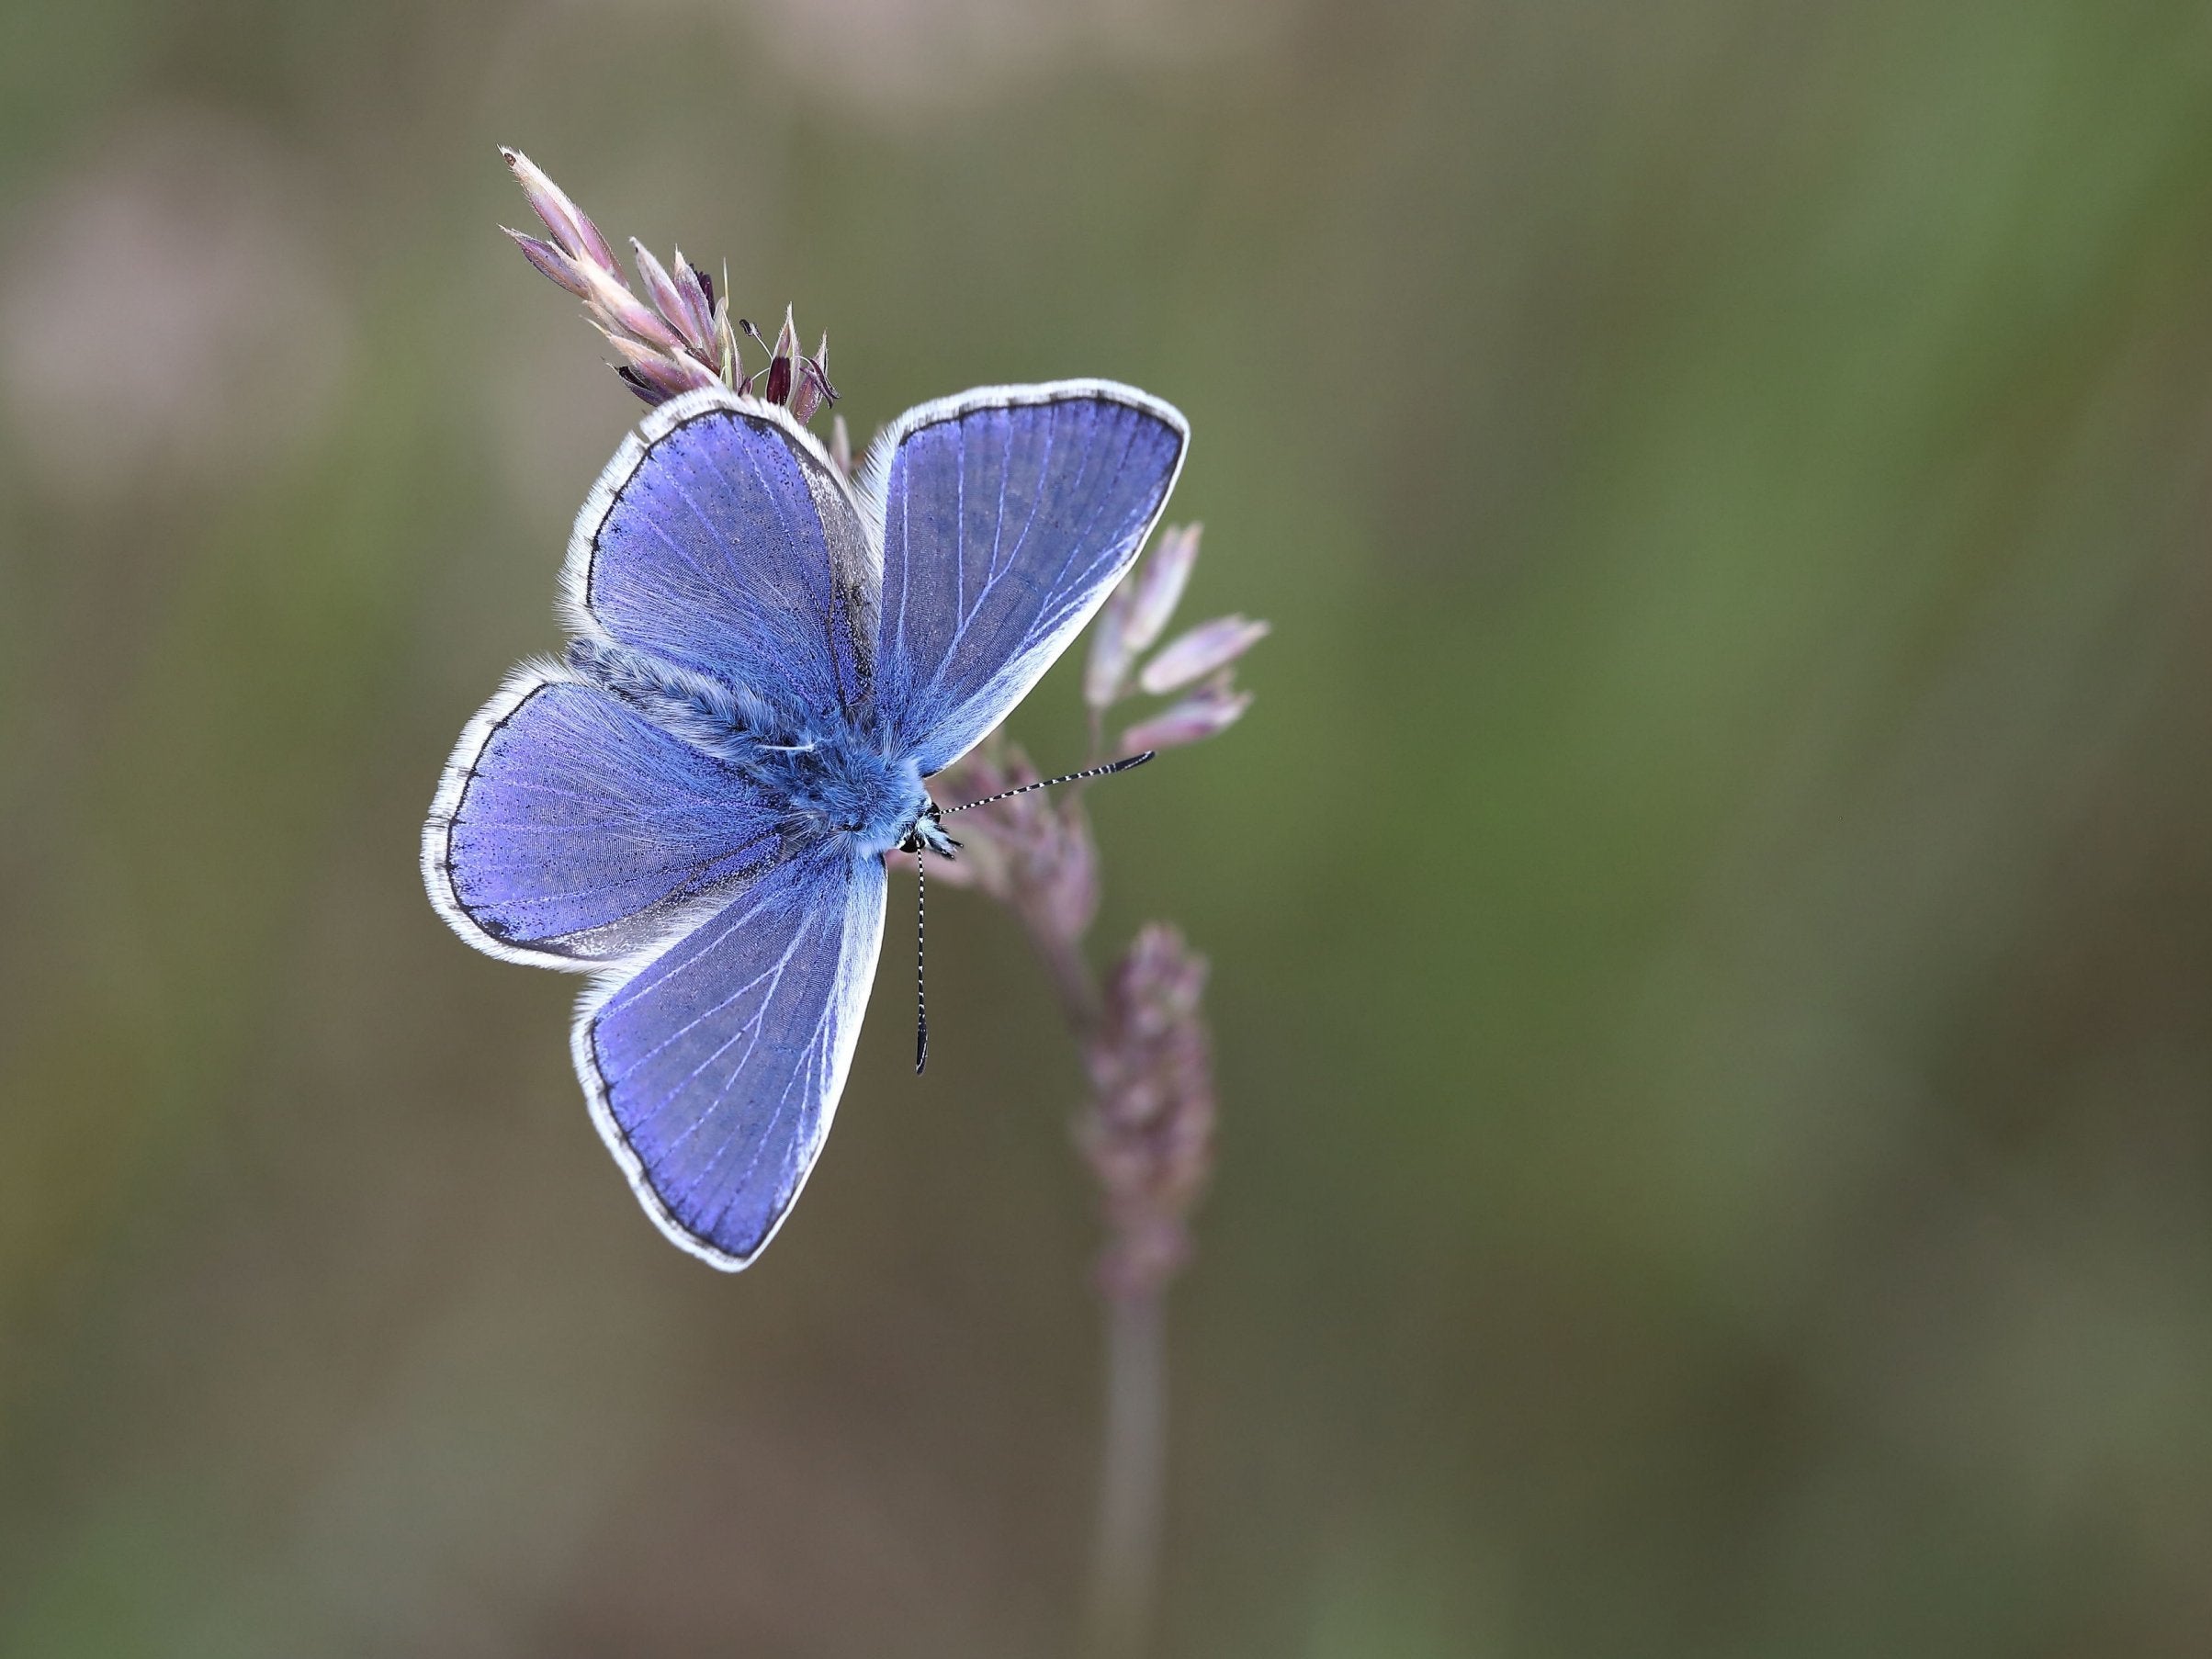 This year's weather conditions have created the right conditions for butterflies to flourish, and the common blue (pictured) is among the species expected to fare particularly well